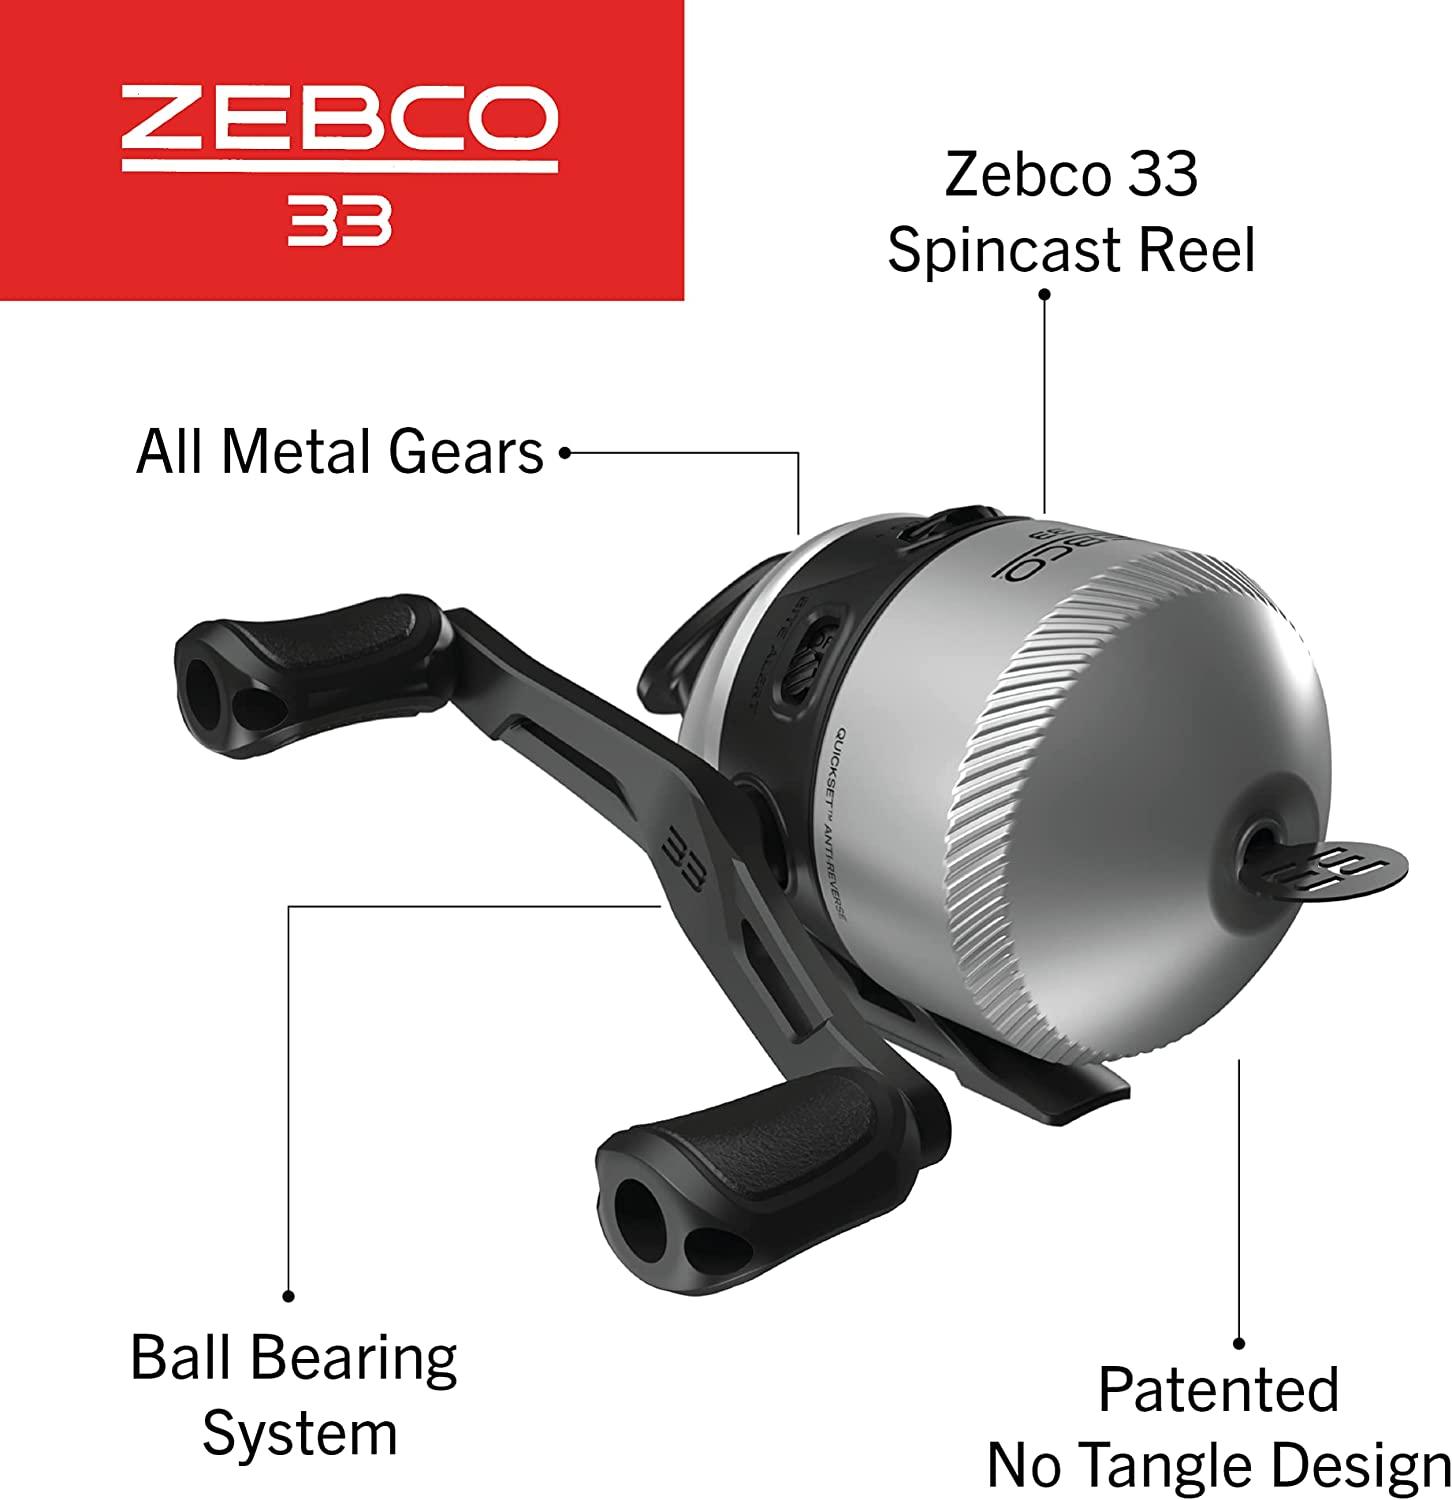 Zebco 33 Spincast Fishing Reel Quickset Anti-Reverse with Bite Alert Smooth  Dial-Adjustable Drag Powerful All-Metal Gears with a Lightweight Graphite  Frame 33 Spincast - SilverBlack